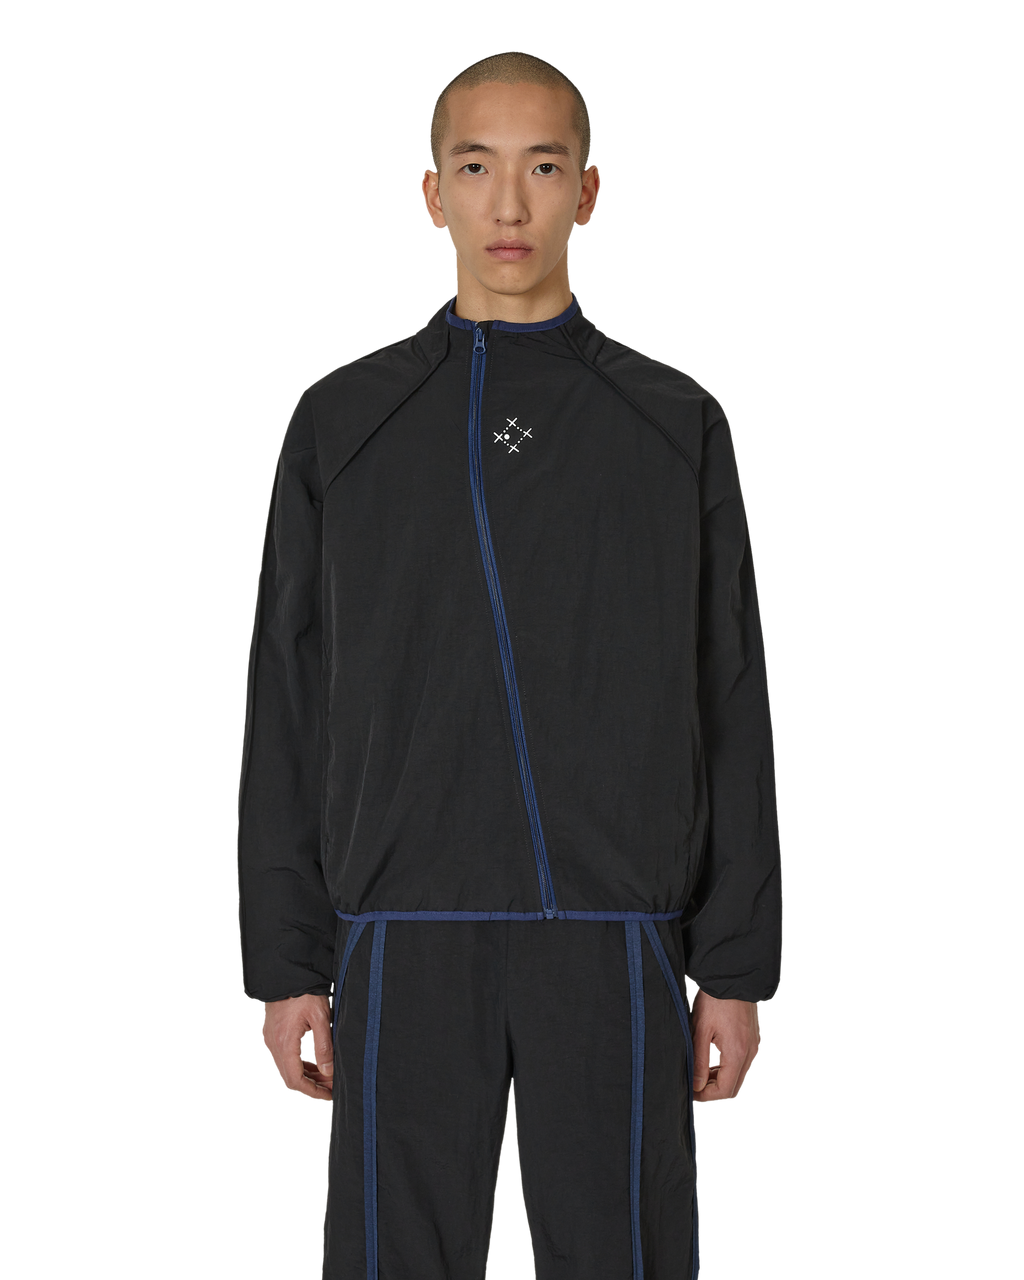 _J.L - A.L_ _J.L-A.L_ x Sound Sports Windbreaker J297464-M-Black front